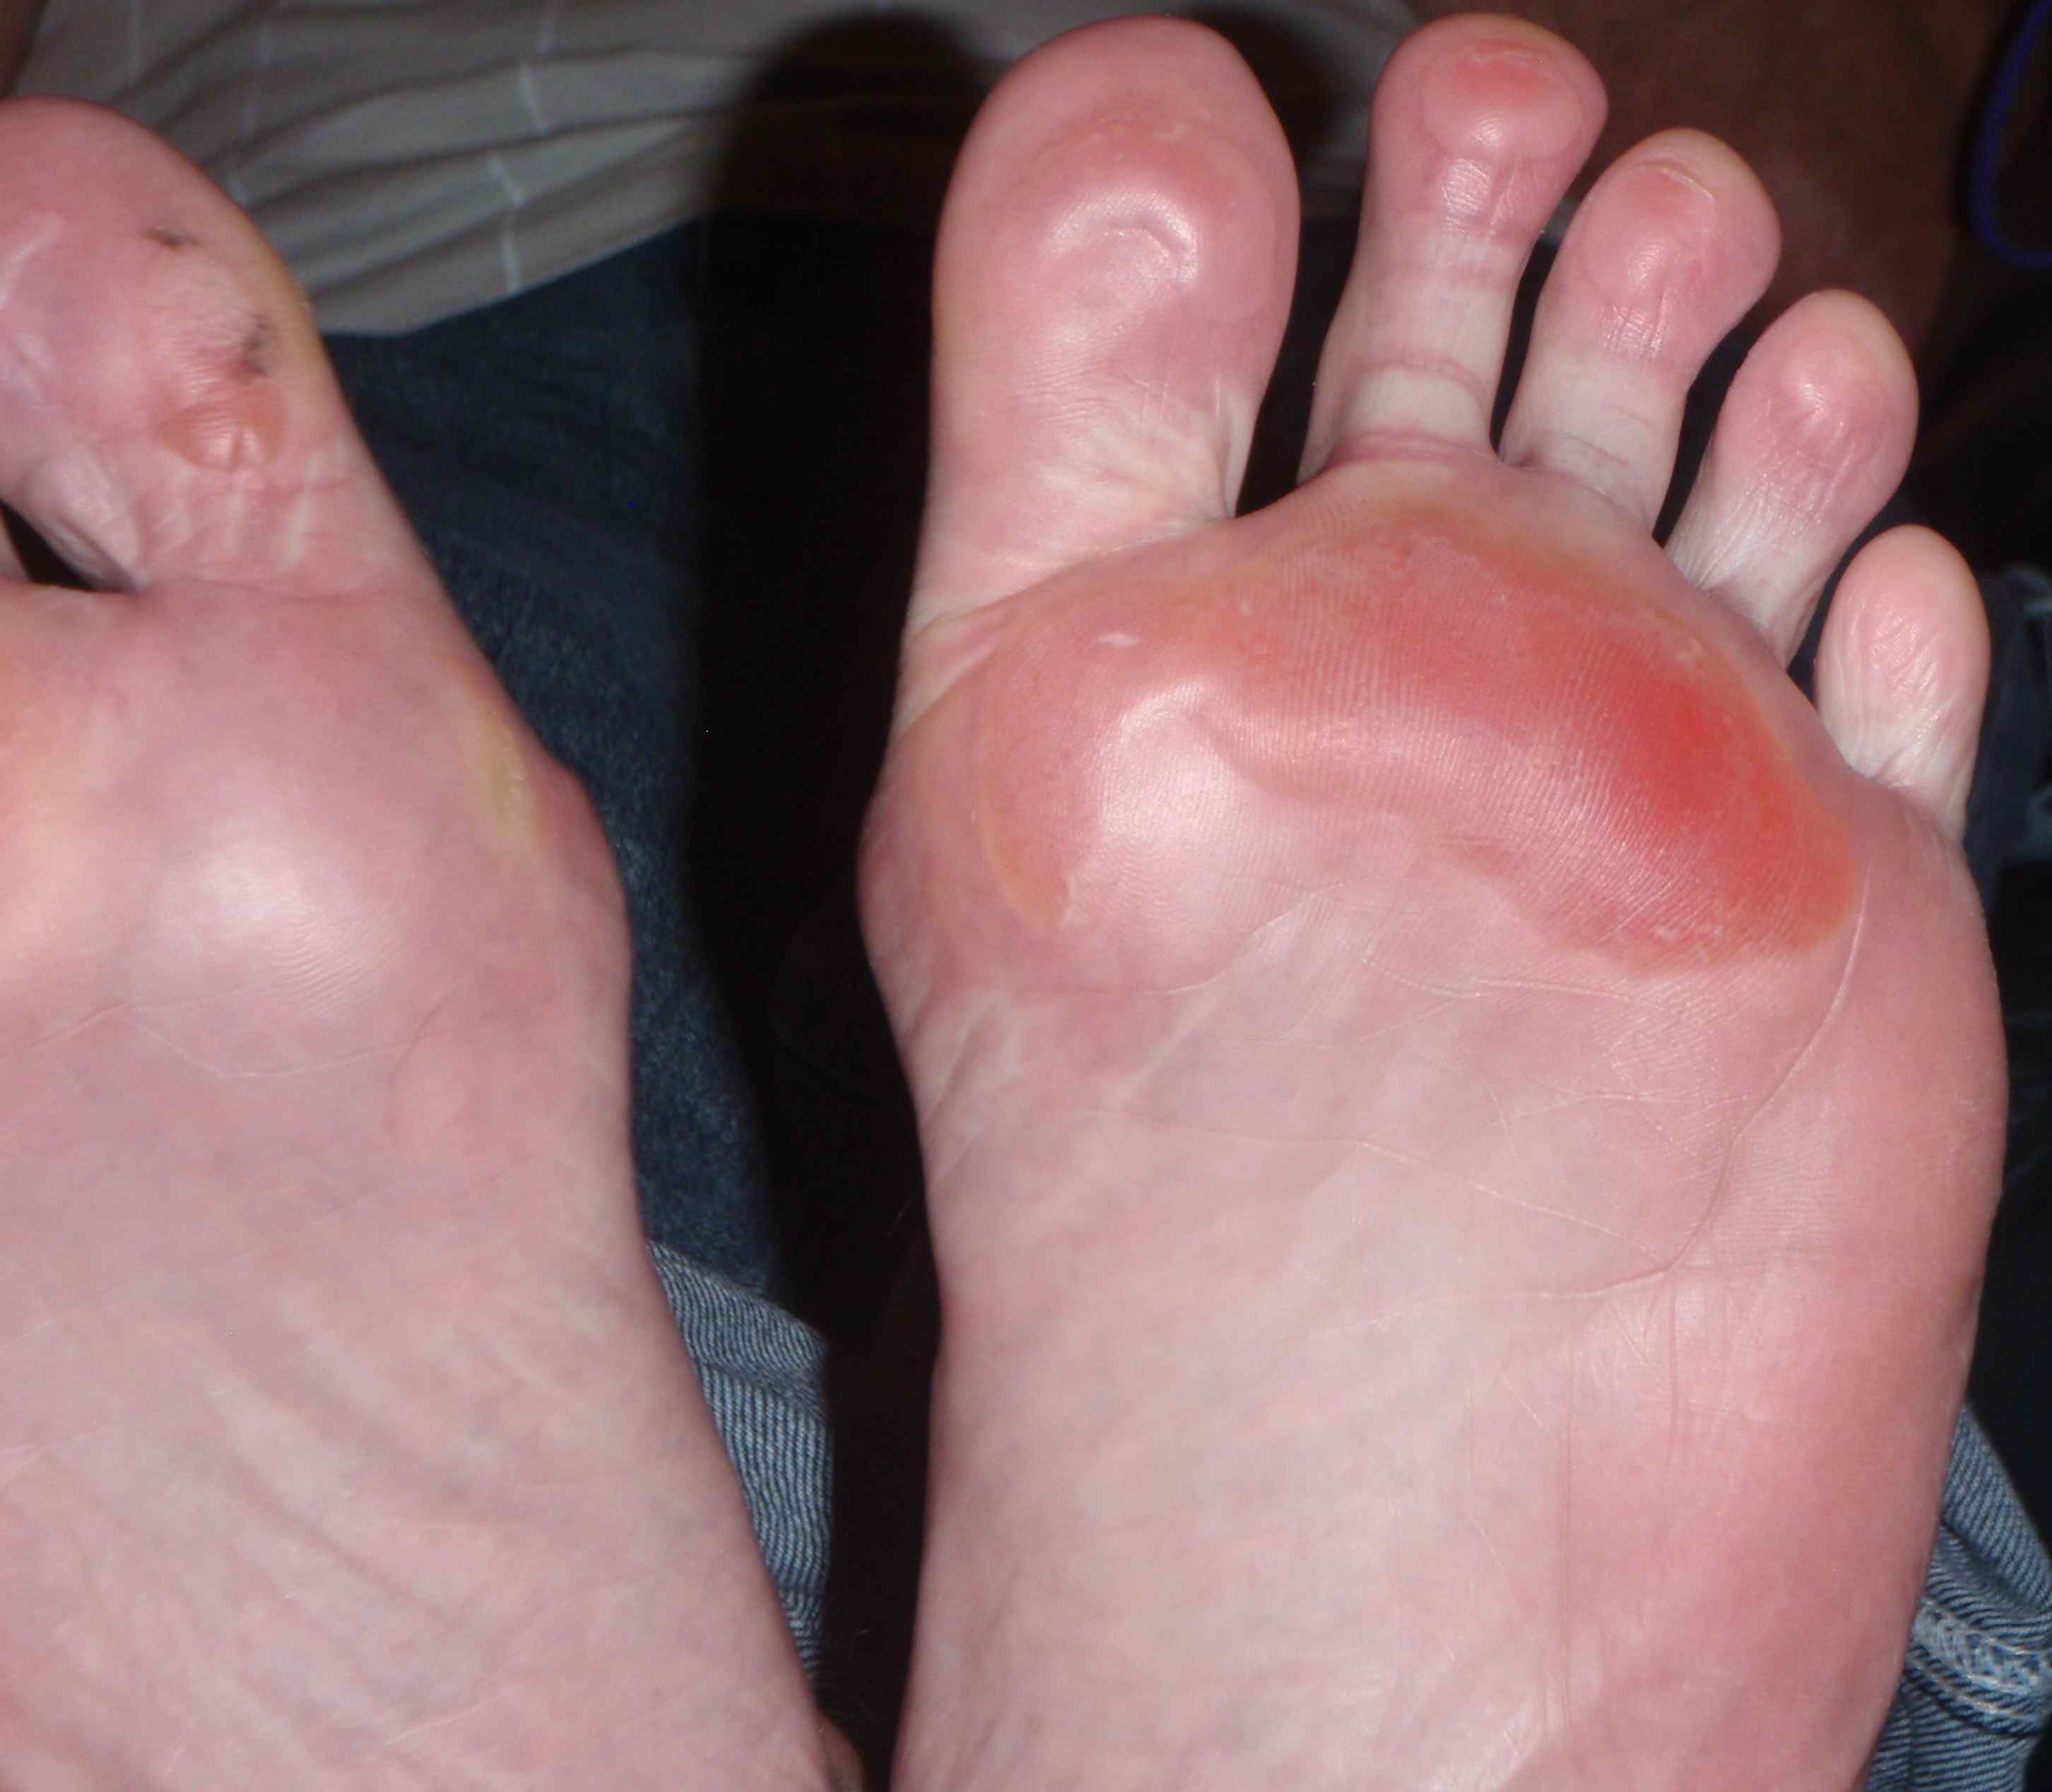 blisters on soles of feet from walking